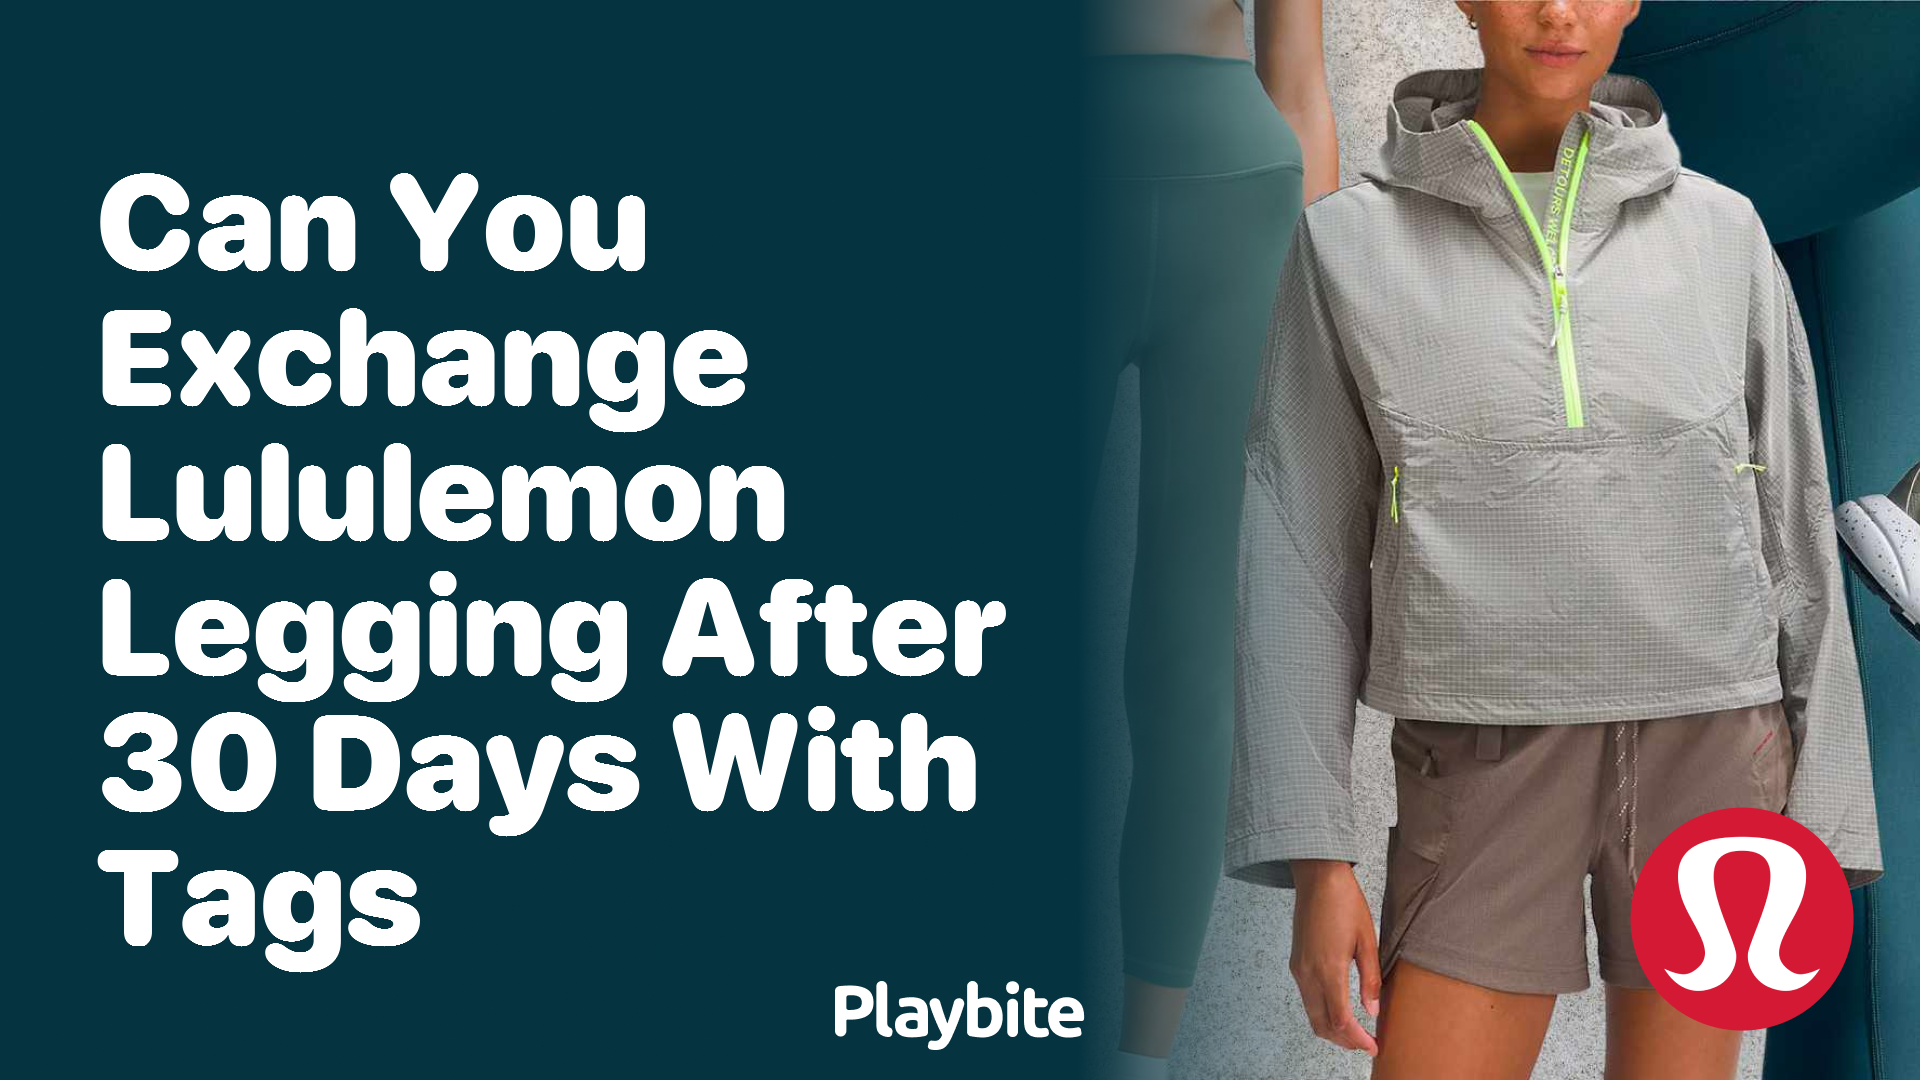 https://www.playbite.com/wp-content/uploads/sites/3/2024/03/can-you-exchange-lululemon-legging-after-30-days-with-tags.png